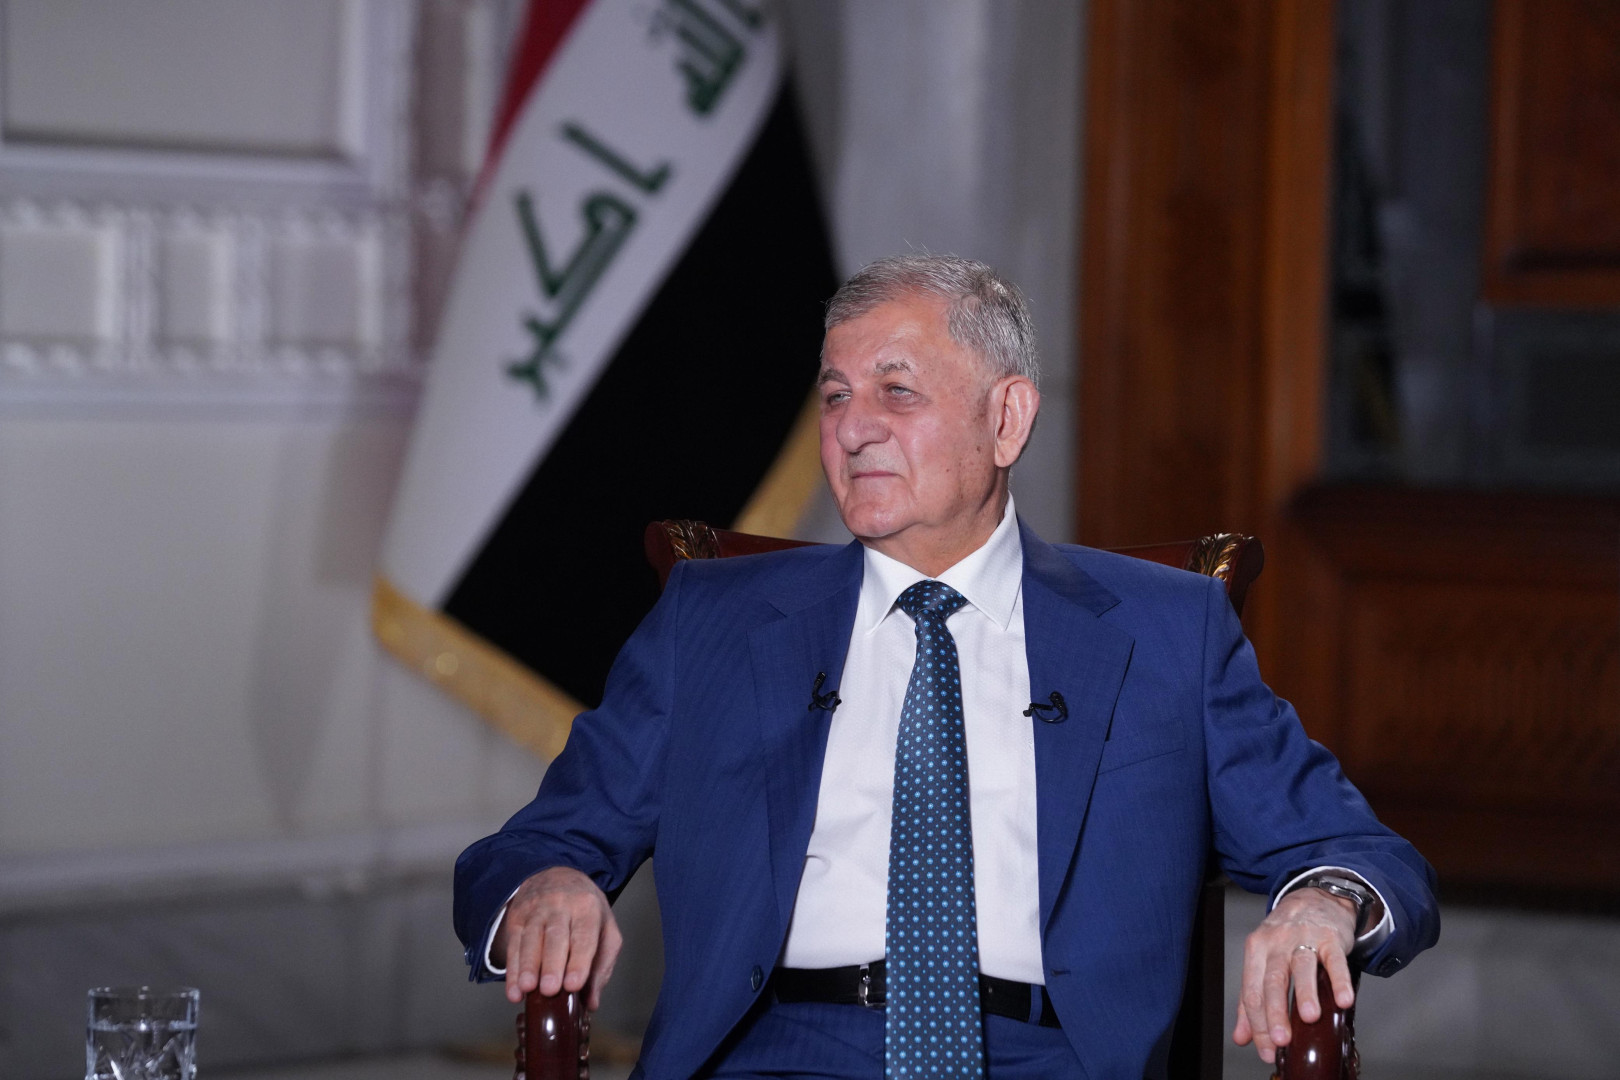 Iraqi president signs controversial AntiLGBTQ law  budget